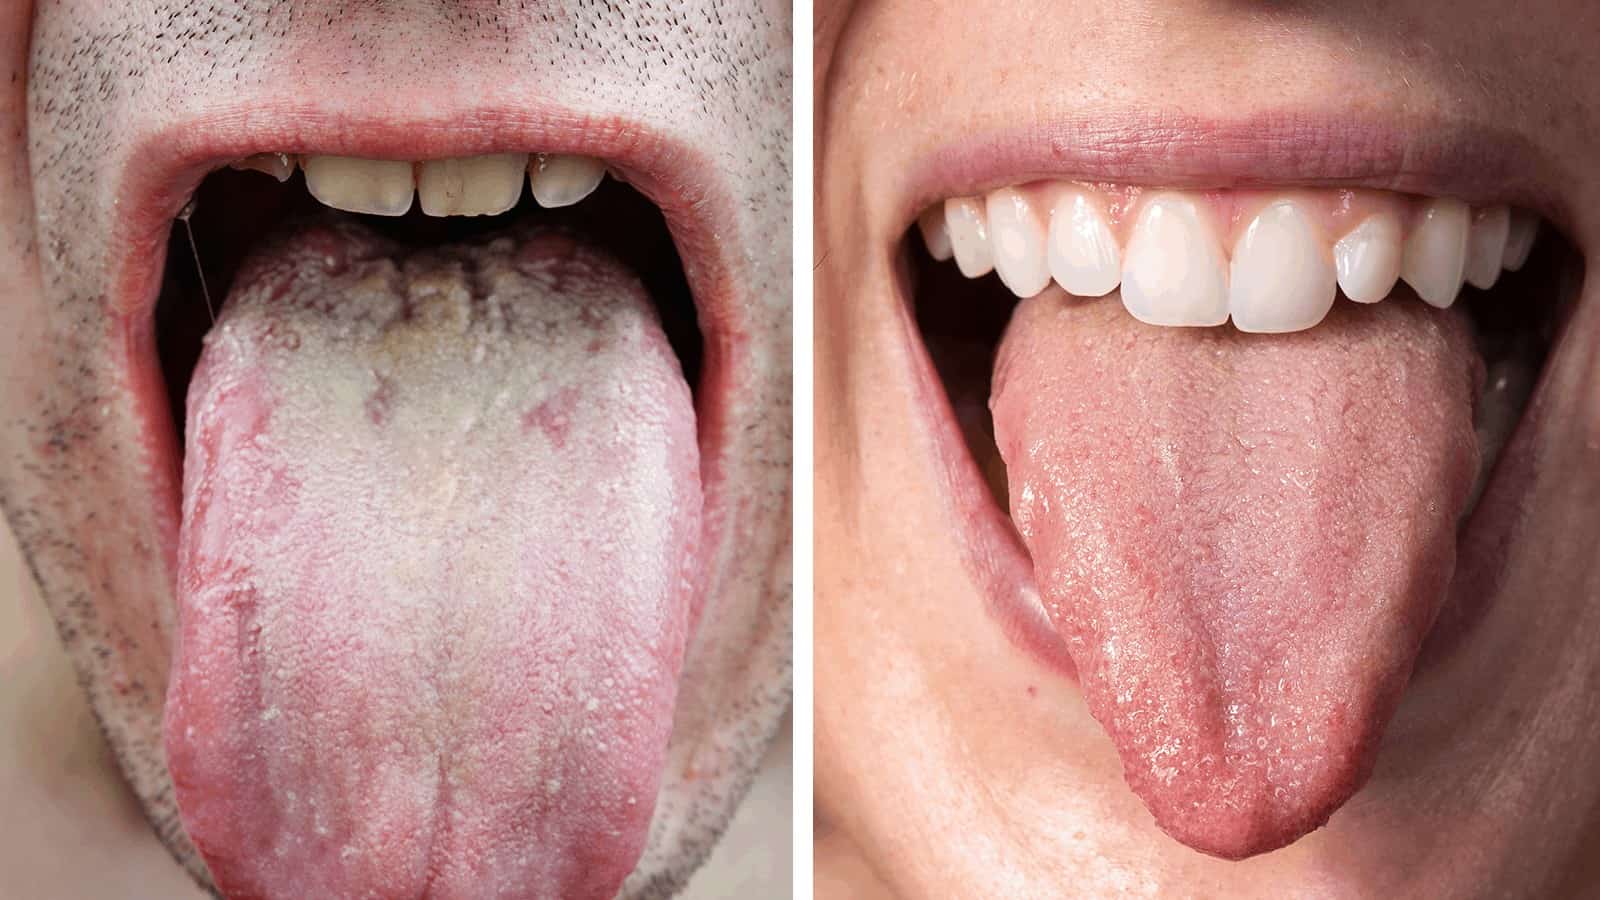 Researchers Explain What The Color of Your Tongue Says About Your Health